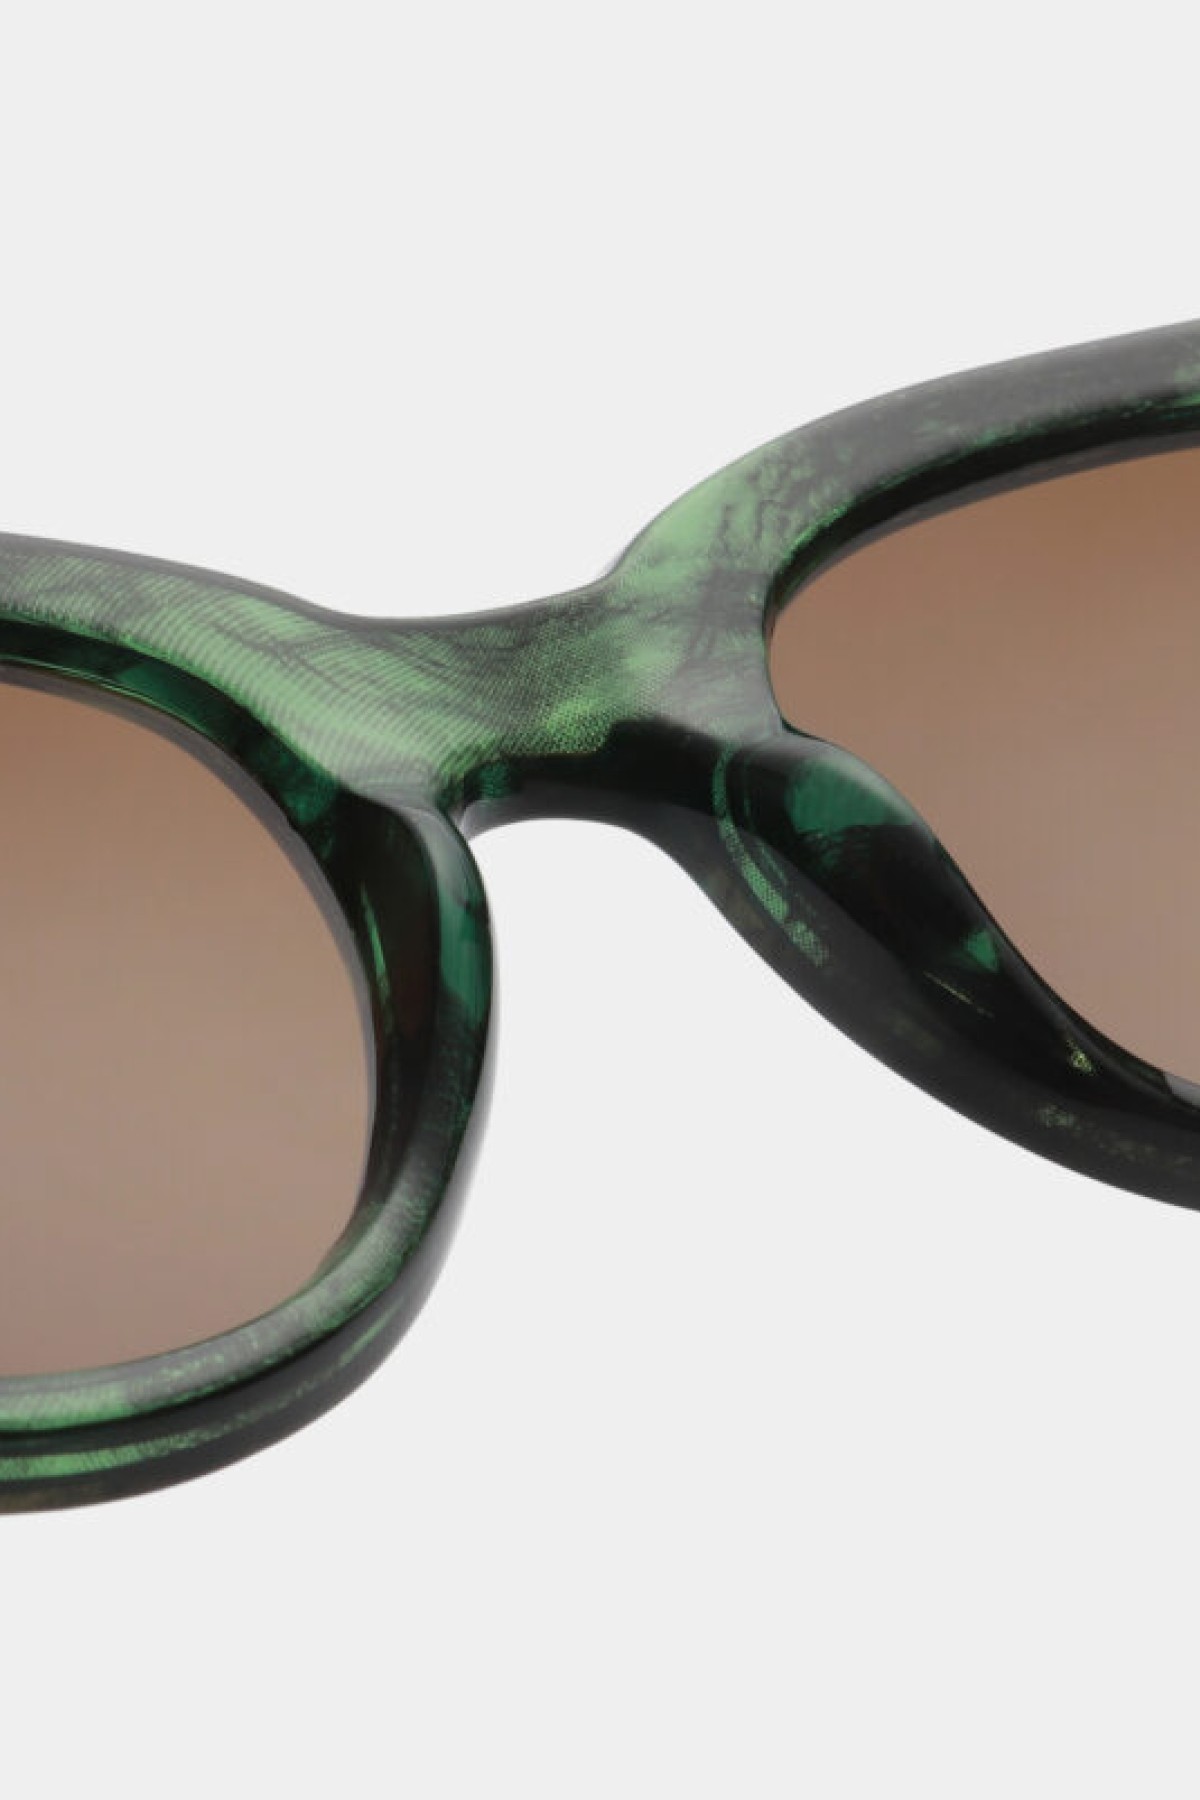 SUNGLASSES GREEN MARBLE - LILLY – UV 400 PROTECTION